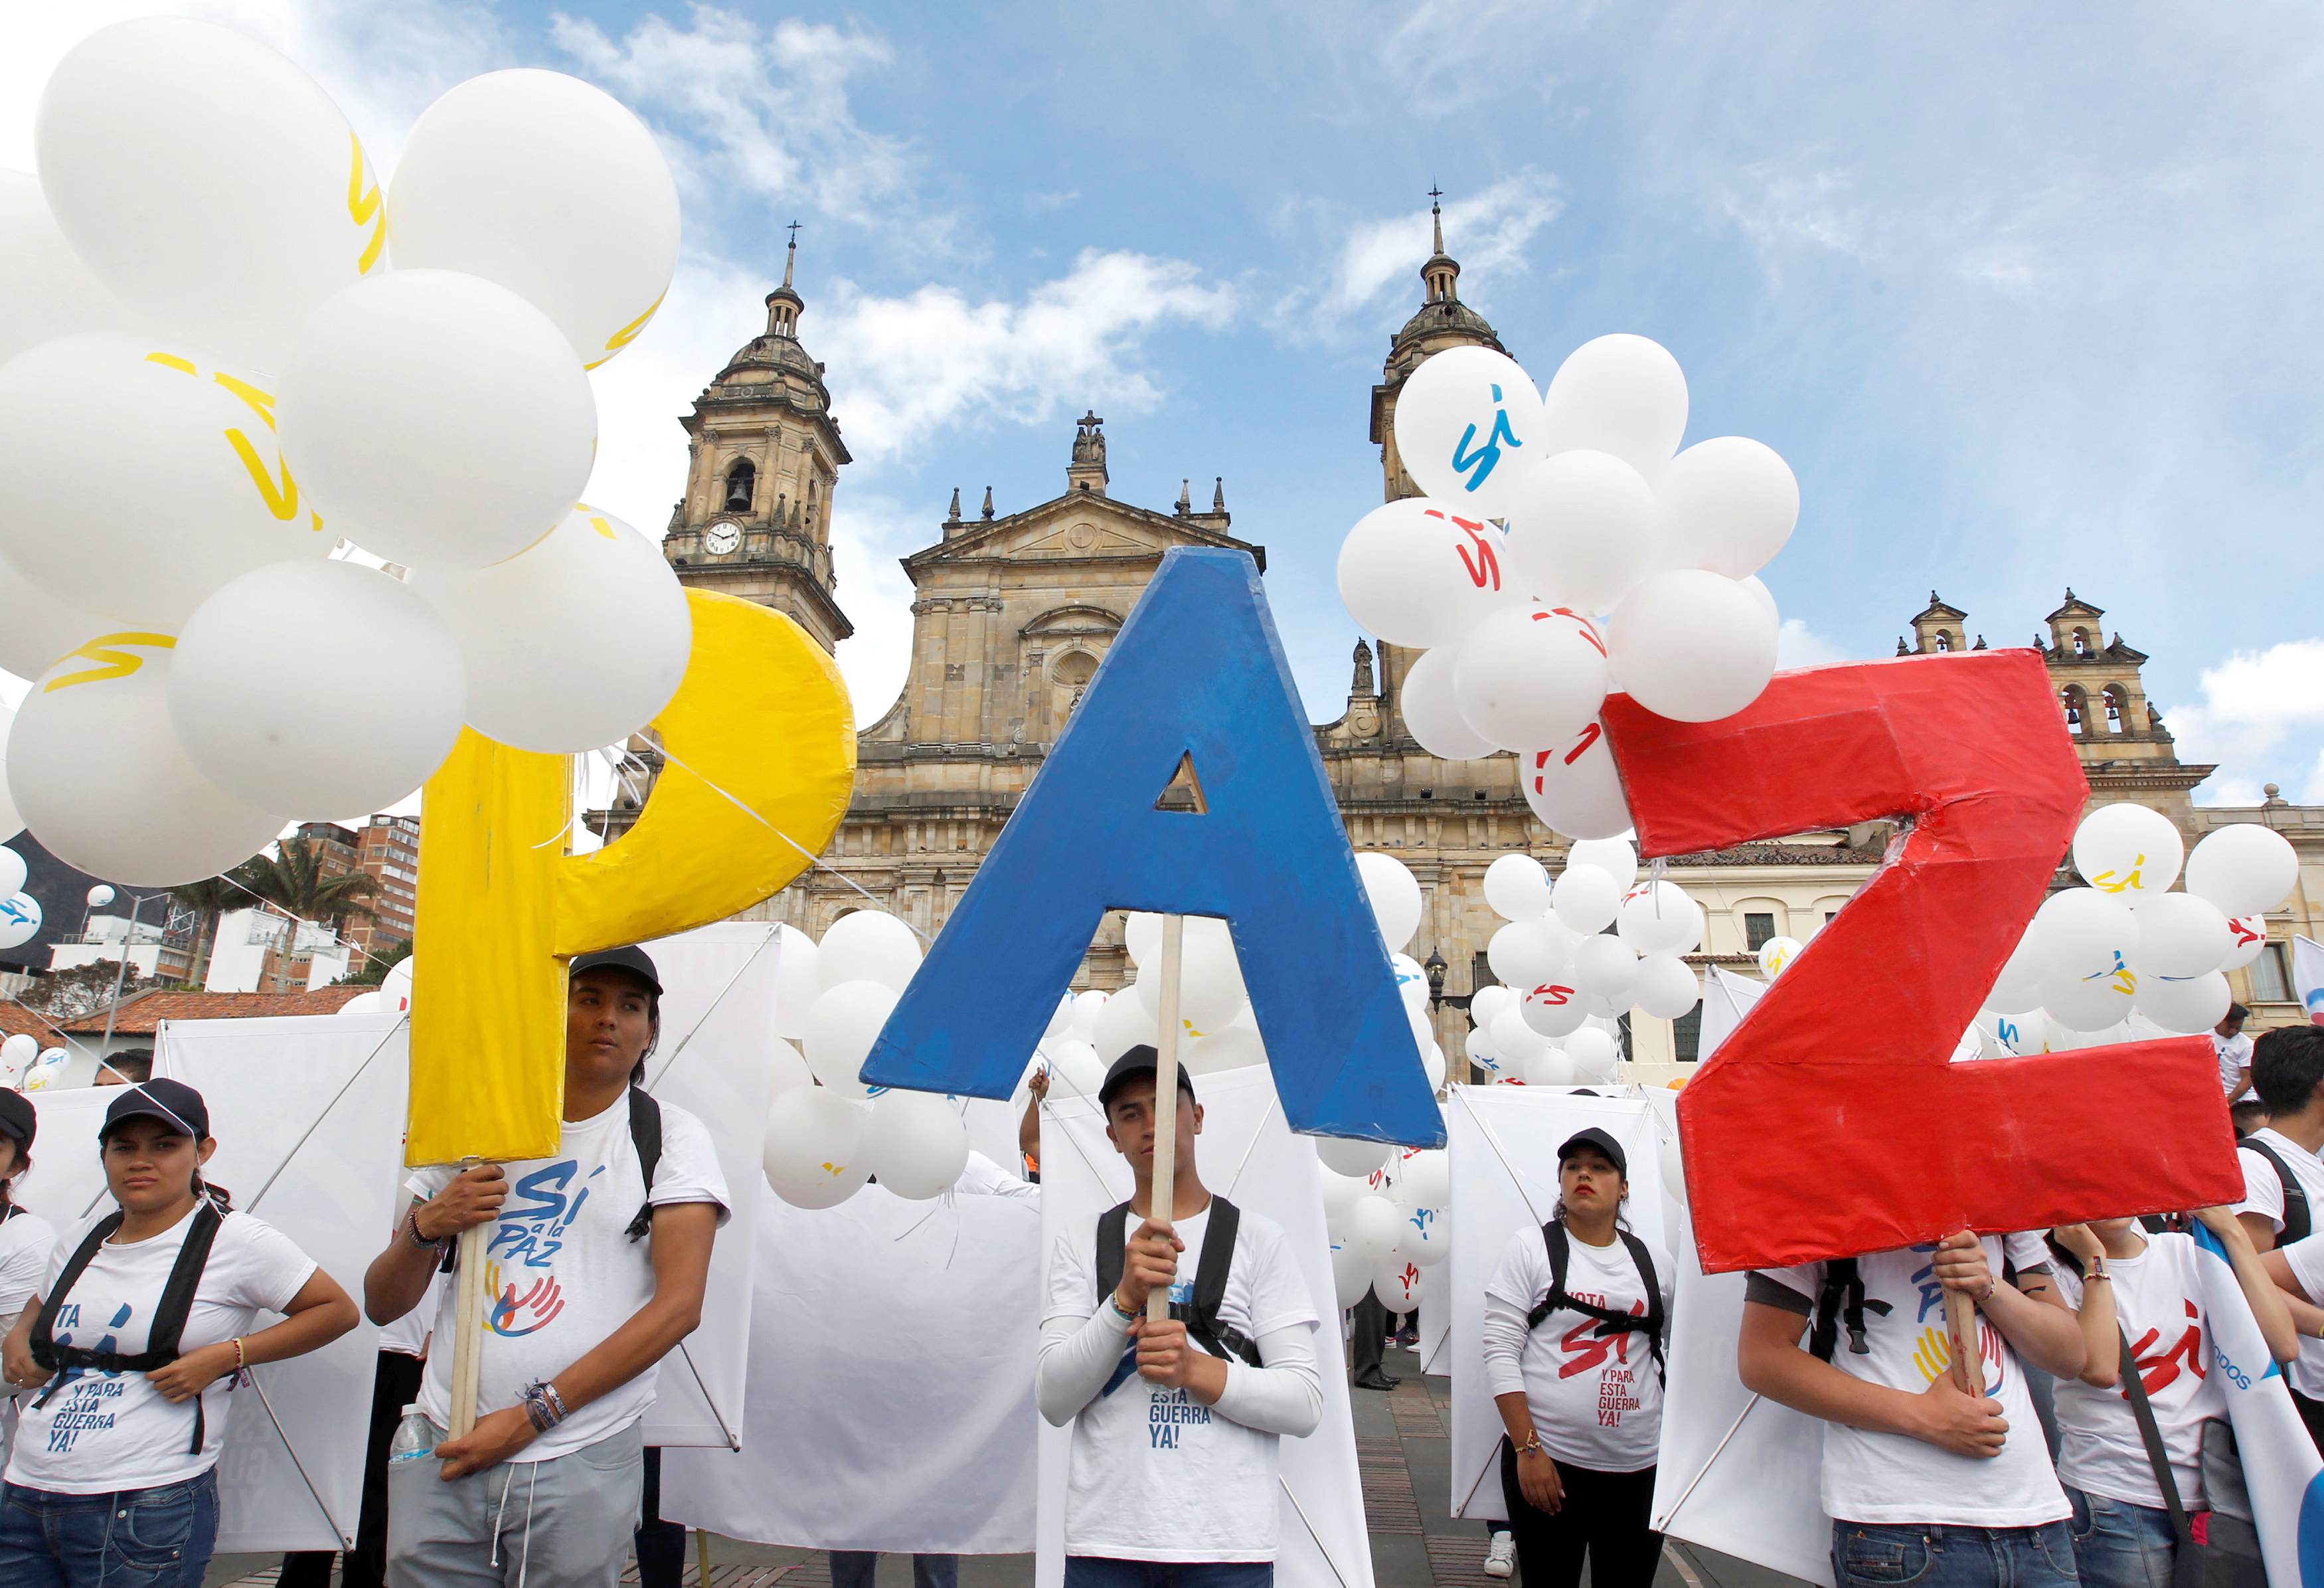 People form the word Peace outside the cathedral Sept. 26 in Bogota, Colombia. To chants of "No more war," the Colombian government and Marxist rebels signed an agreement that day to end Latin America's last armed conflict. (CNS photo/Felipe Caicedo, Reuters)